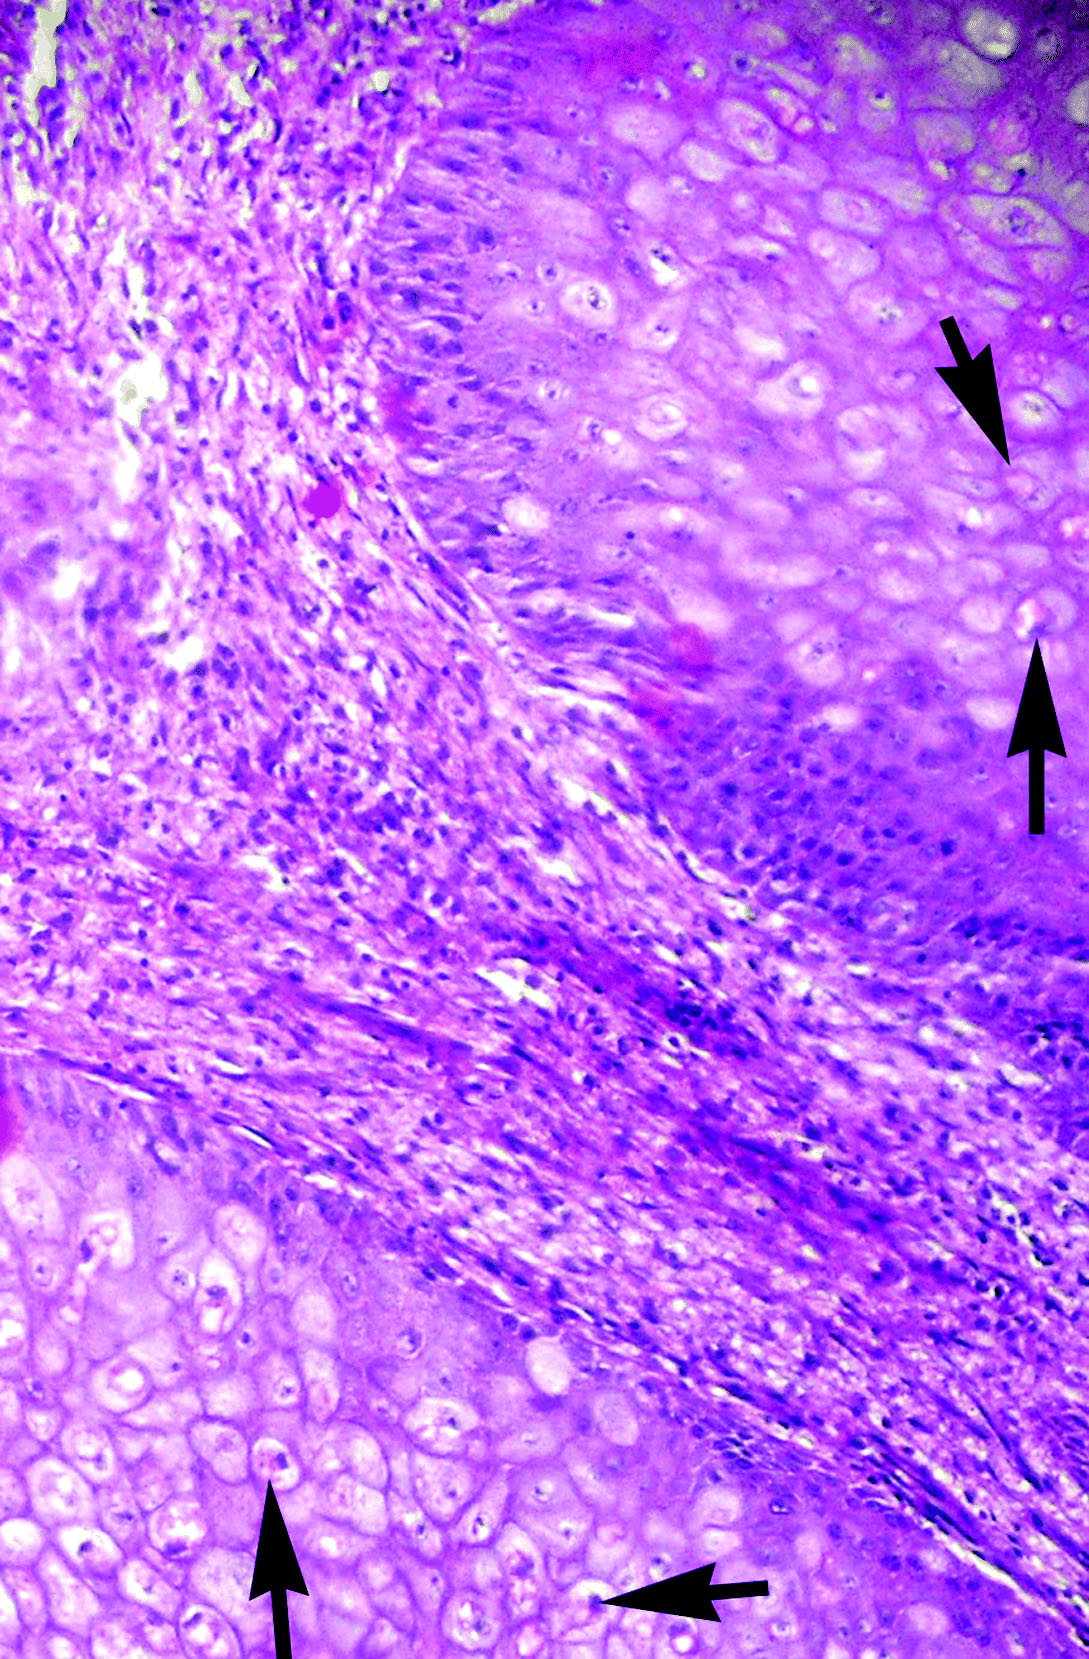 Figure 5.  Extensive proliferation of fibrous connective tissue, rounded and swollen keratinocytes with pleomorphic and hyperchromatic nucleus and eosinophilic intracytoplasmic (Bollinger bodies) inclusion bodies (arrows) in peafowl chick suffered from avian pox. Haematoxylin and eosin. Magnification x100.